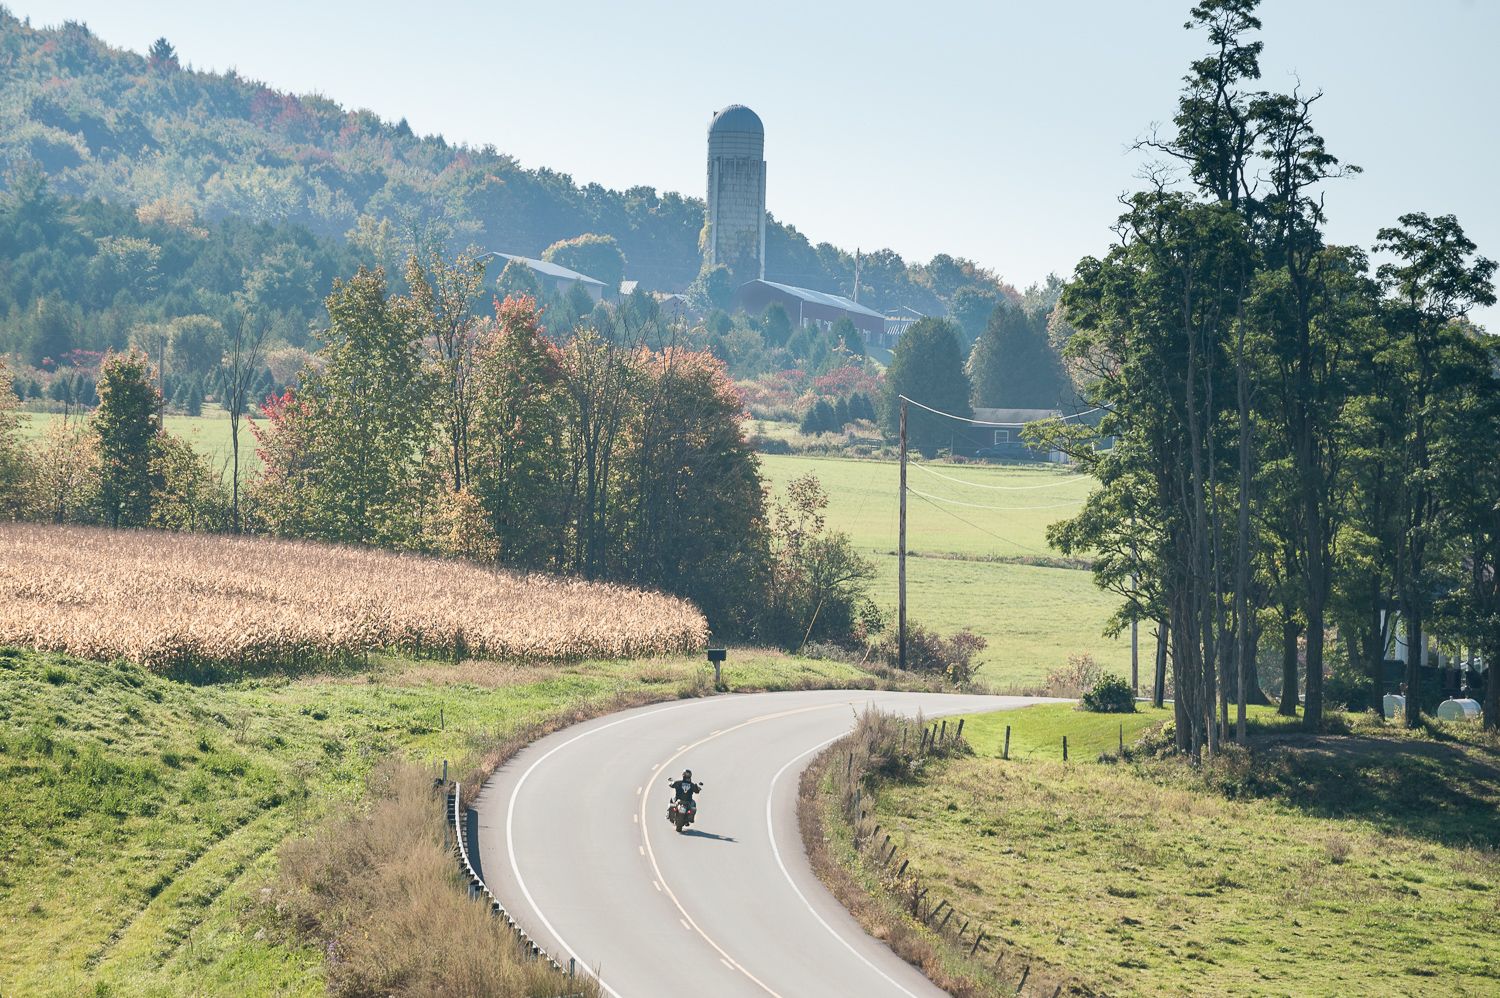  A lone rider rounds a corner on a fall morning on VT-116. Photo by Bobbi LoCicero 